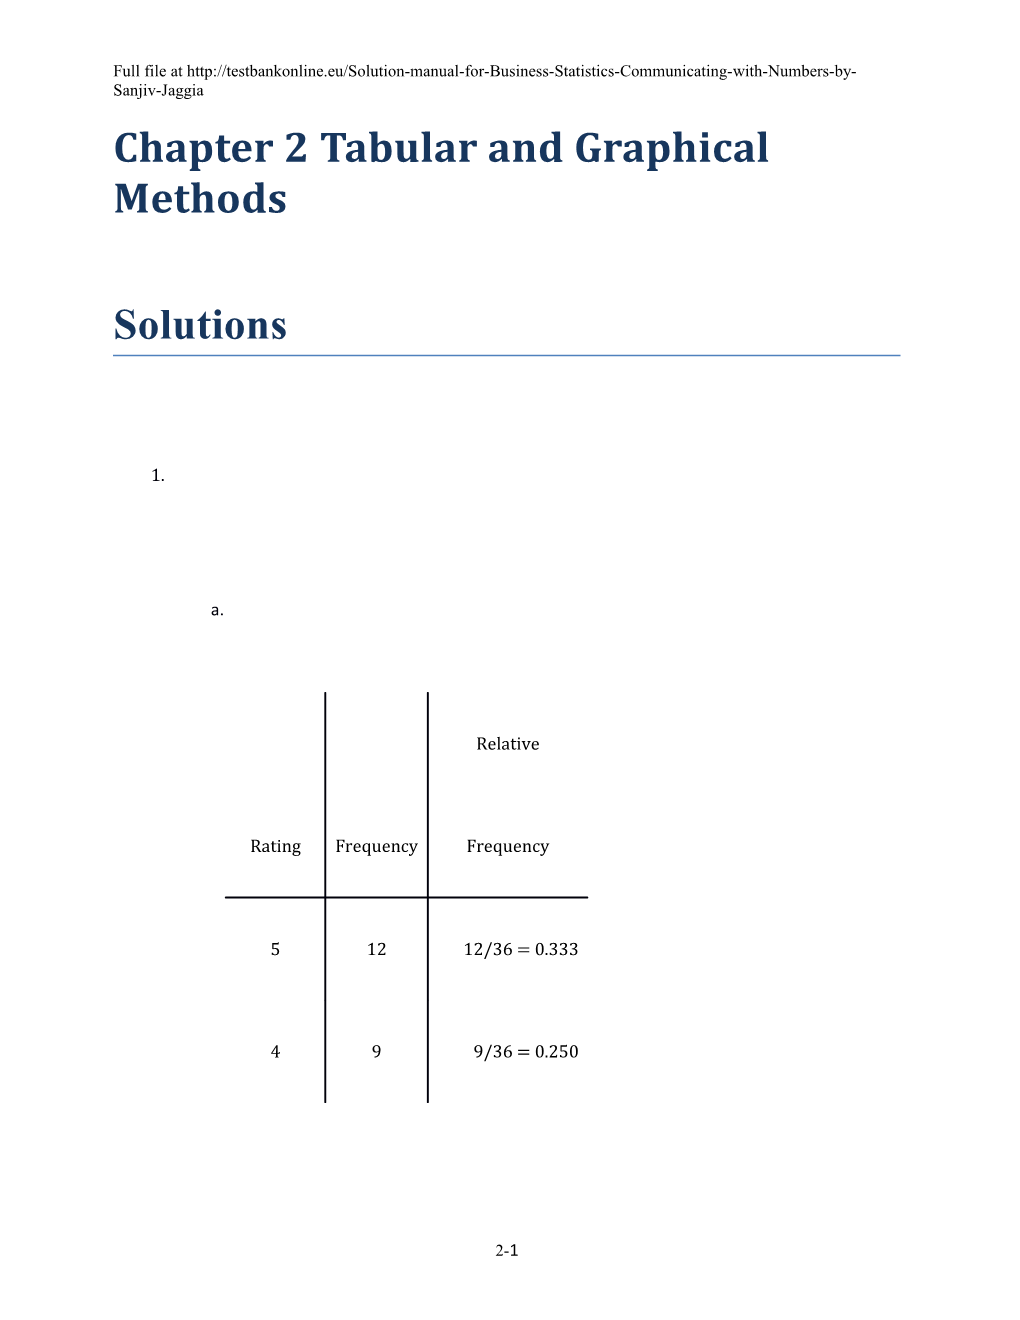 Chapter 2 Tabular and Graphical Methods